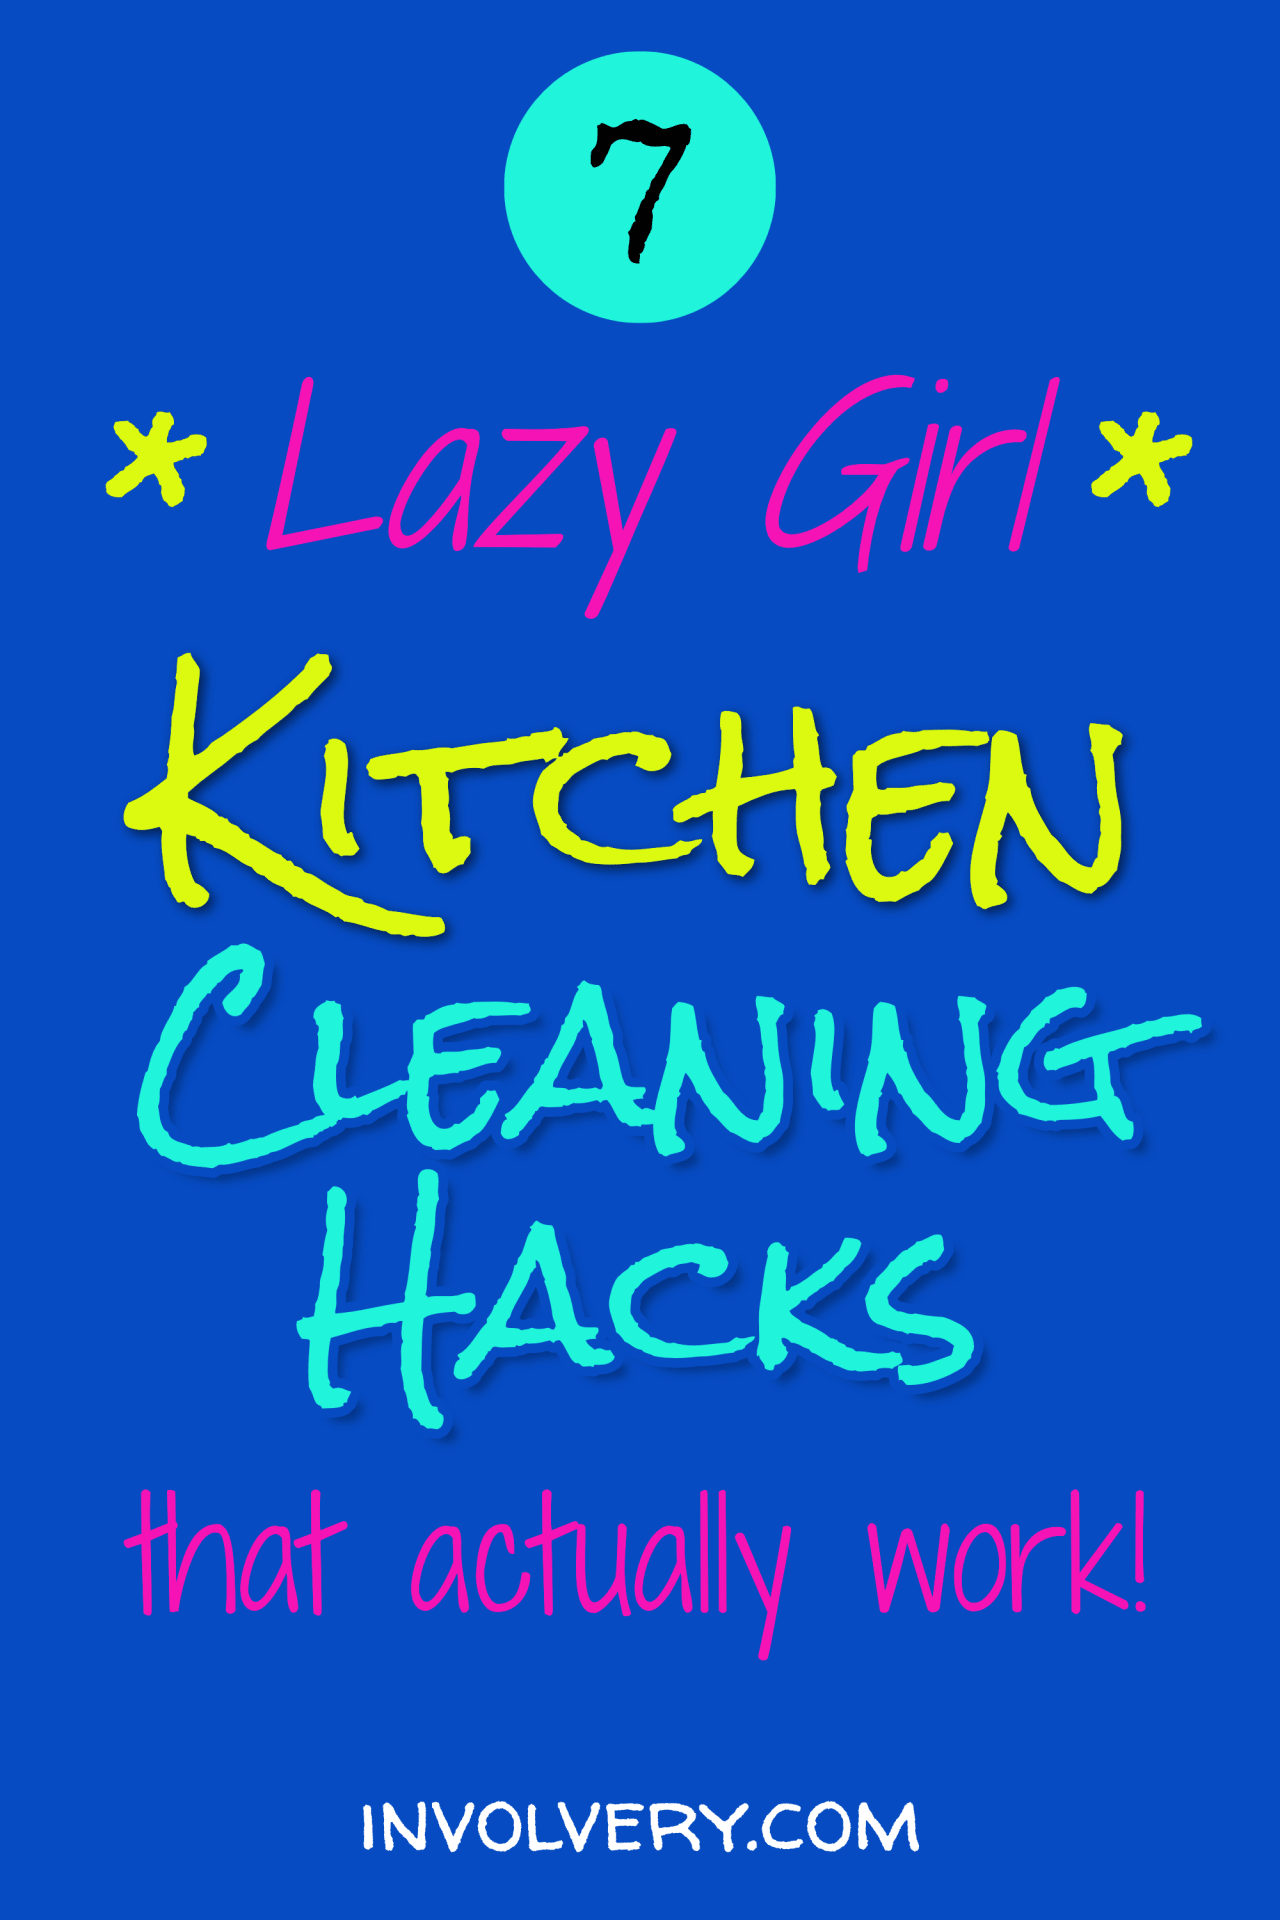 kitchen cleaning hacks - Lazy kitchen cleaning hacks that actually work!  Borderline genius cleaning hacks for lazy girls who don't have time to clean